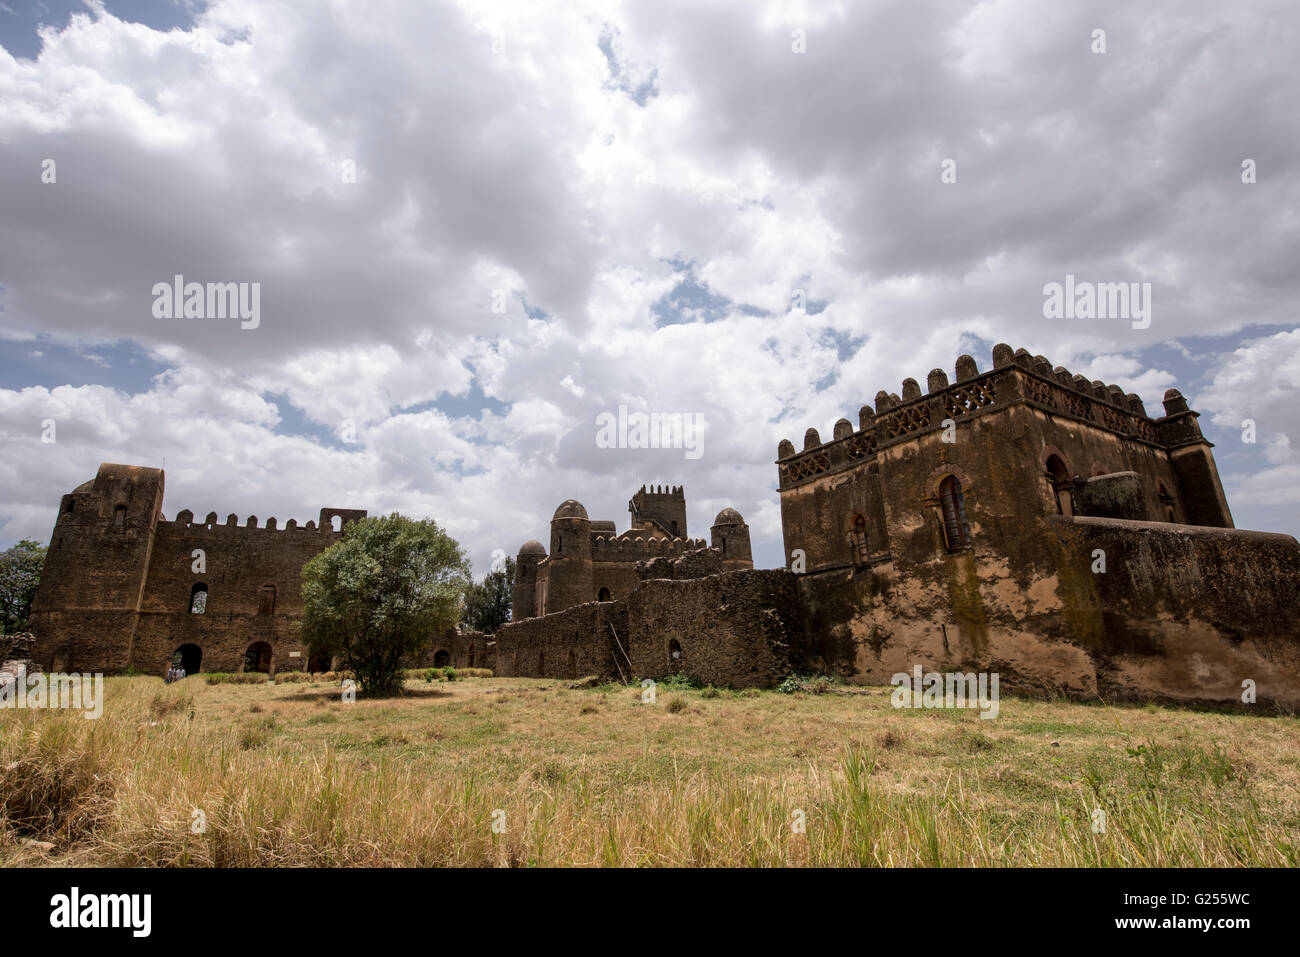 Royal Enclosure castle and other historical monuments Gondar, Ethiopia Stock Photo